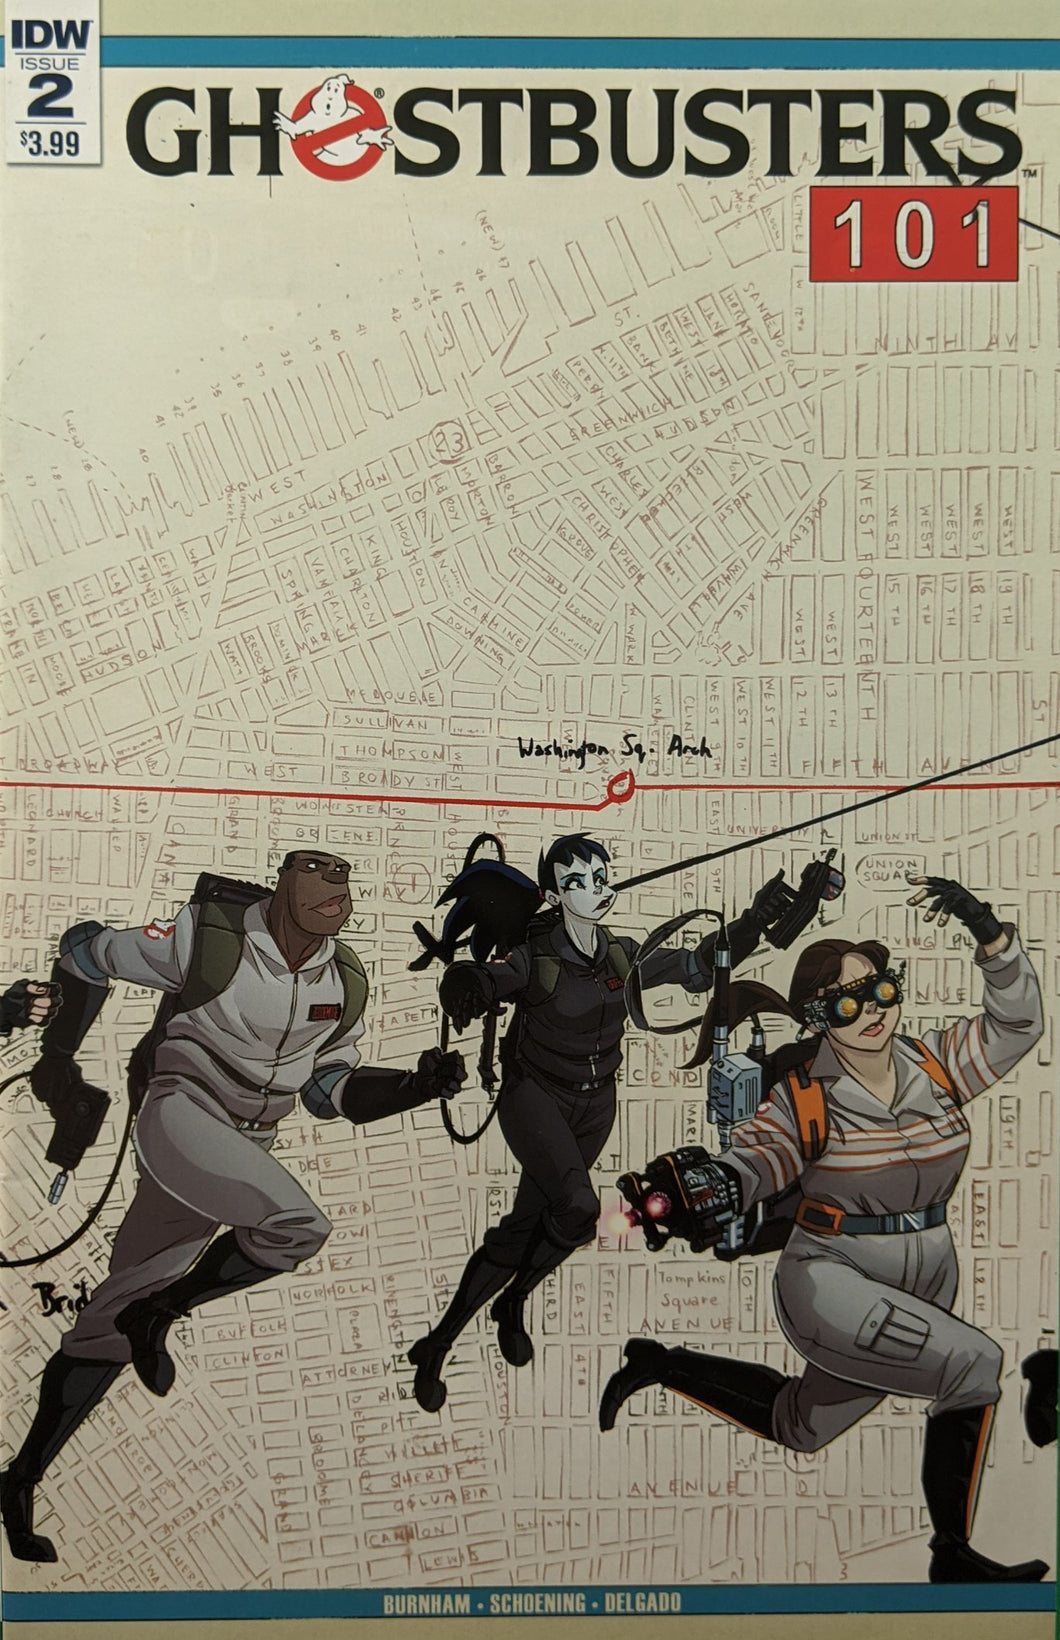 Ghostbusters 101 #2 Comic Book Cover Art